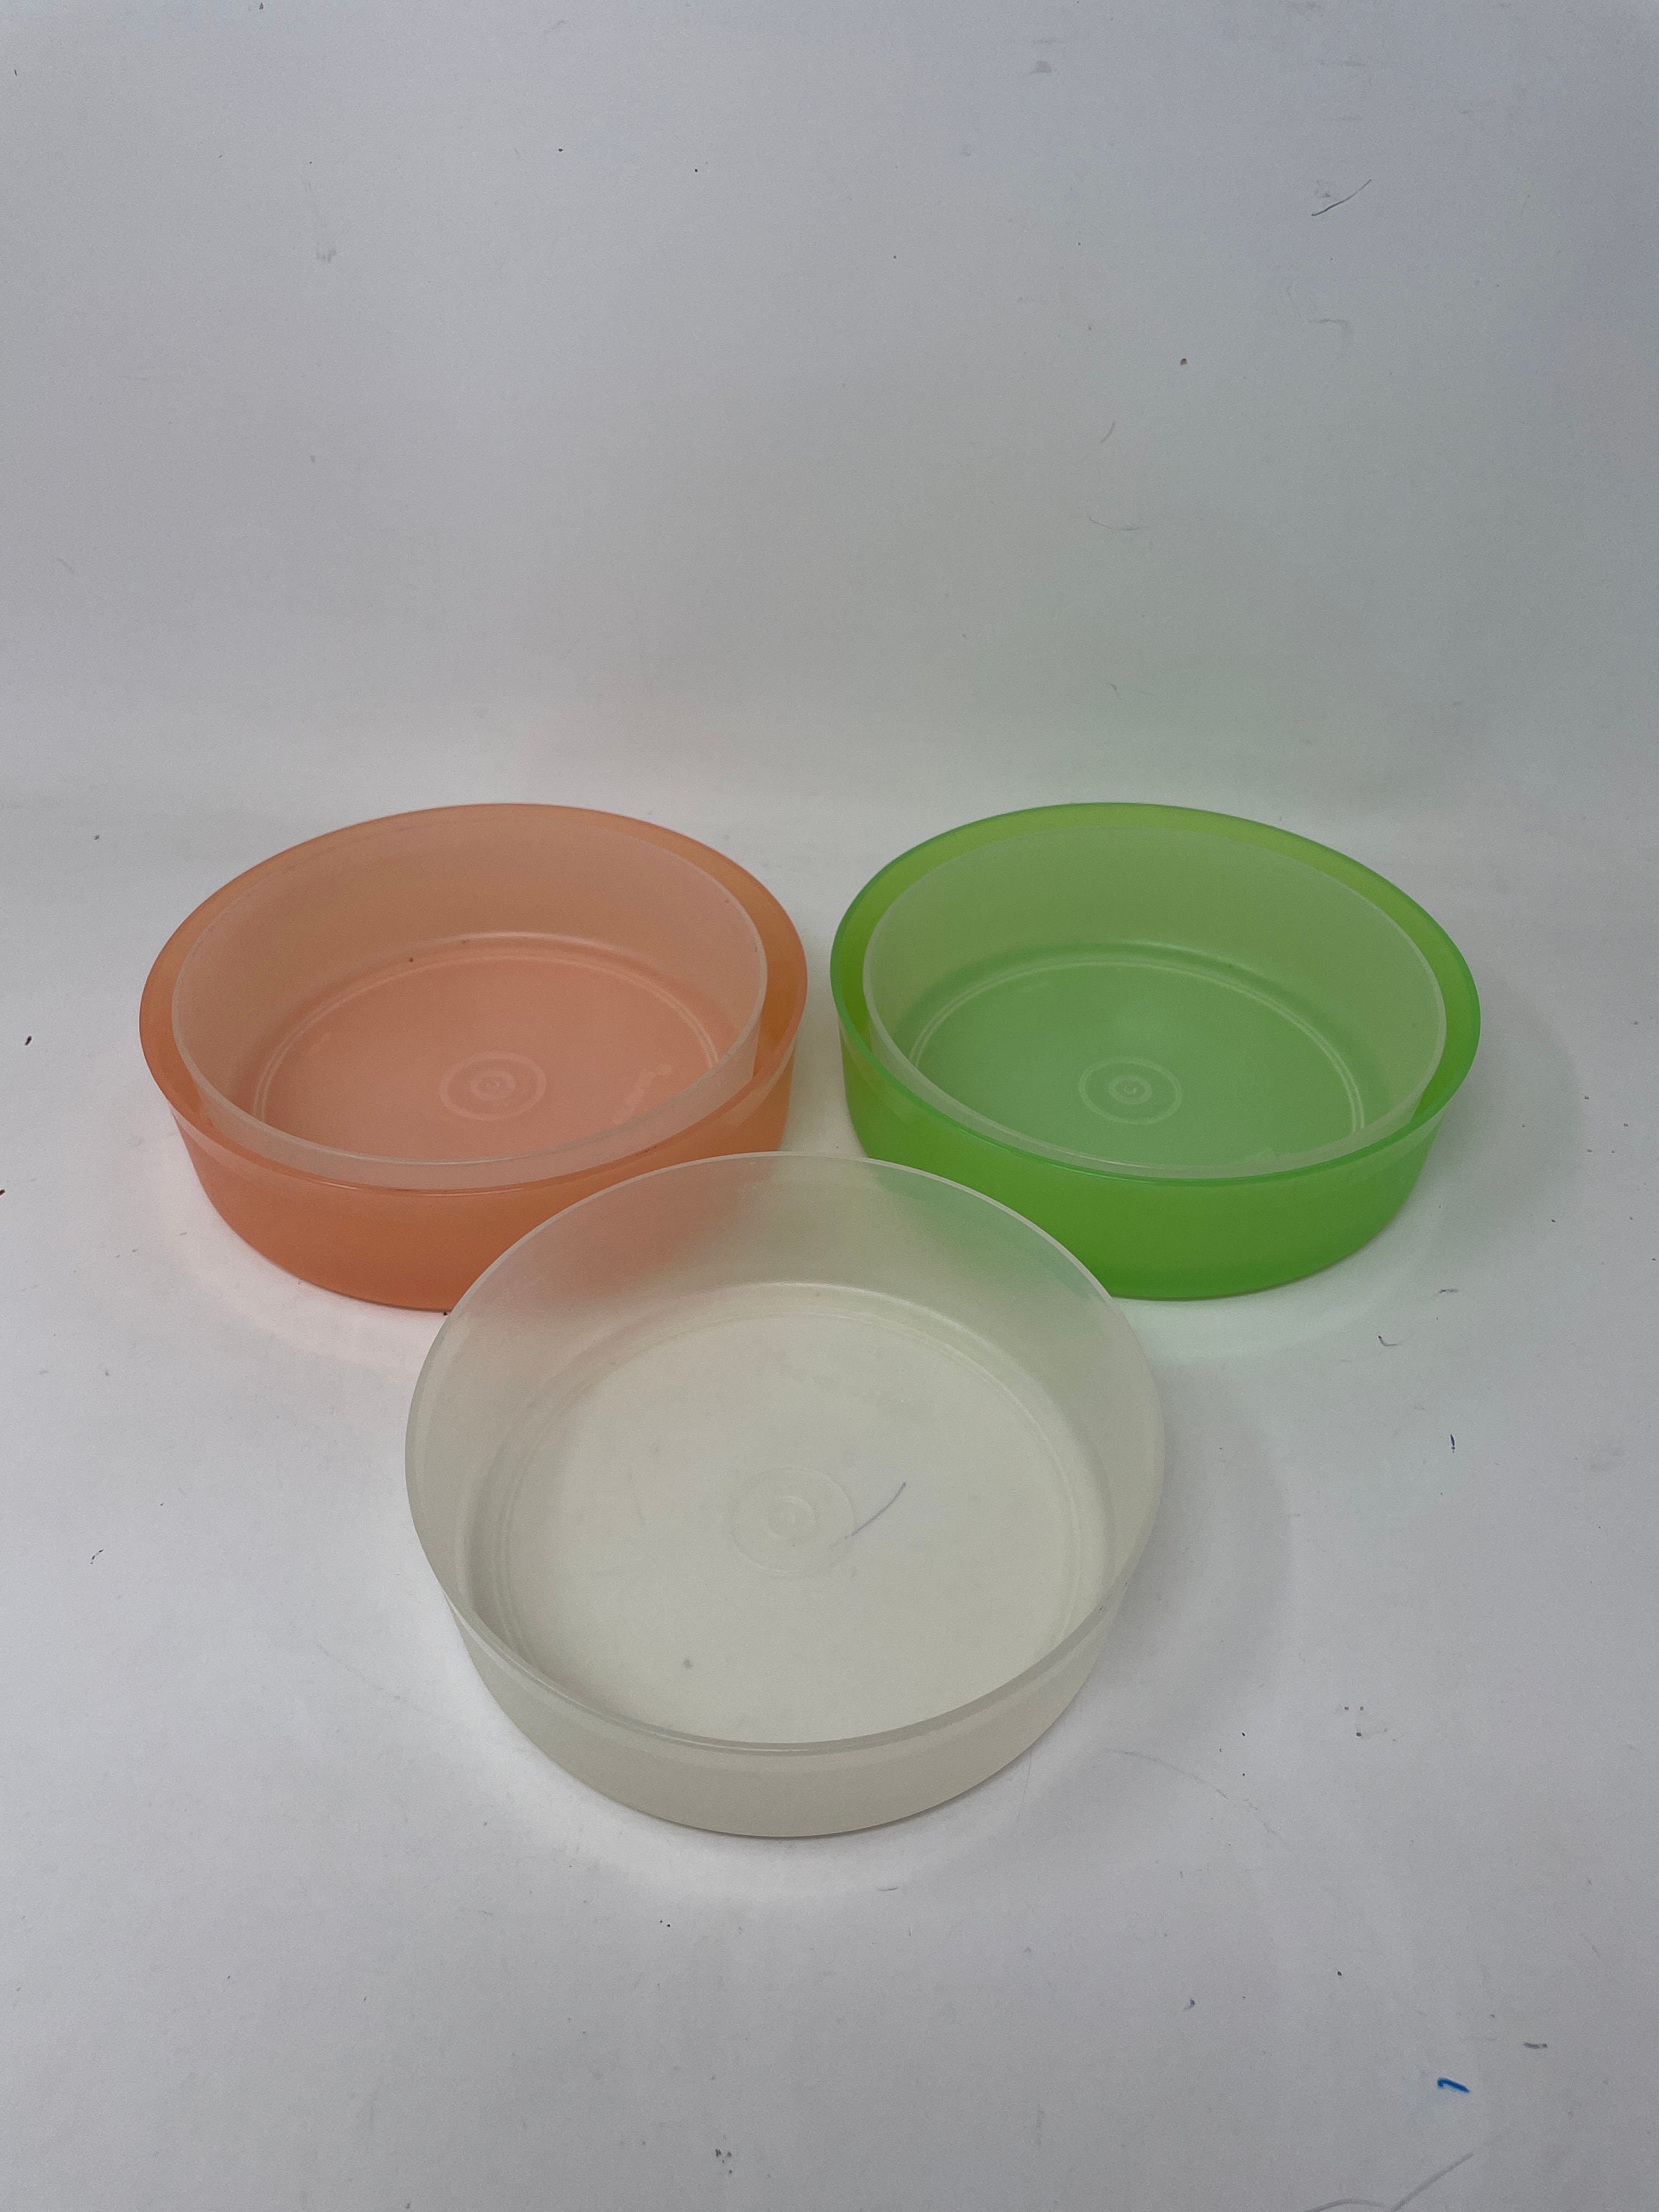 3 Authentic 1950s Tupperware Pie Slice Carrier Keepers - Ruby Lane